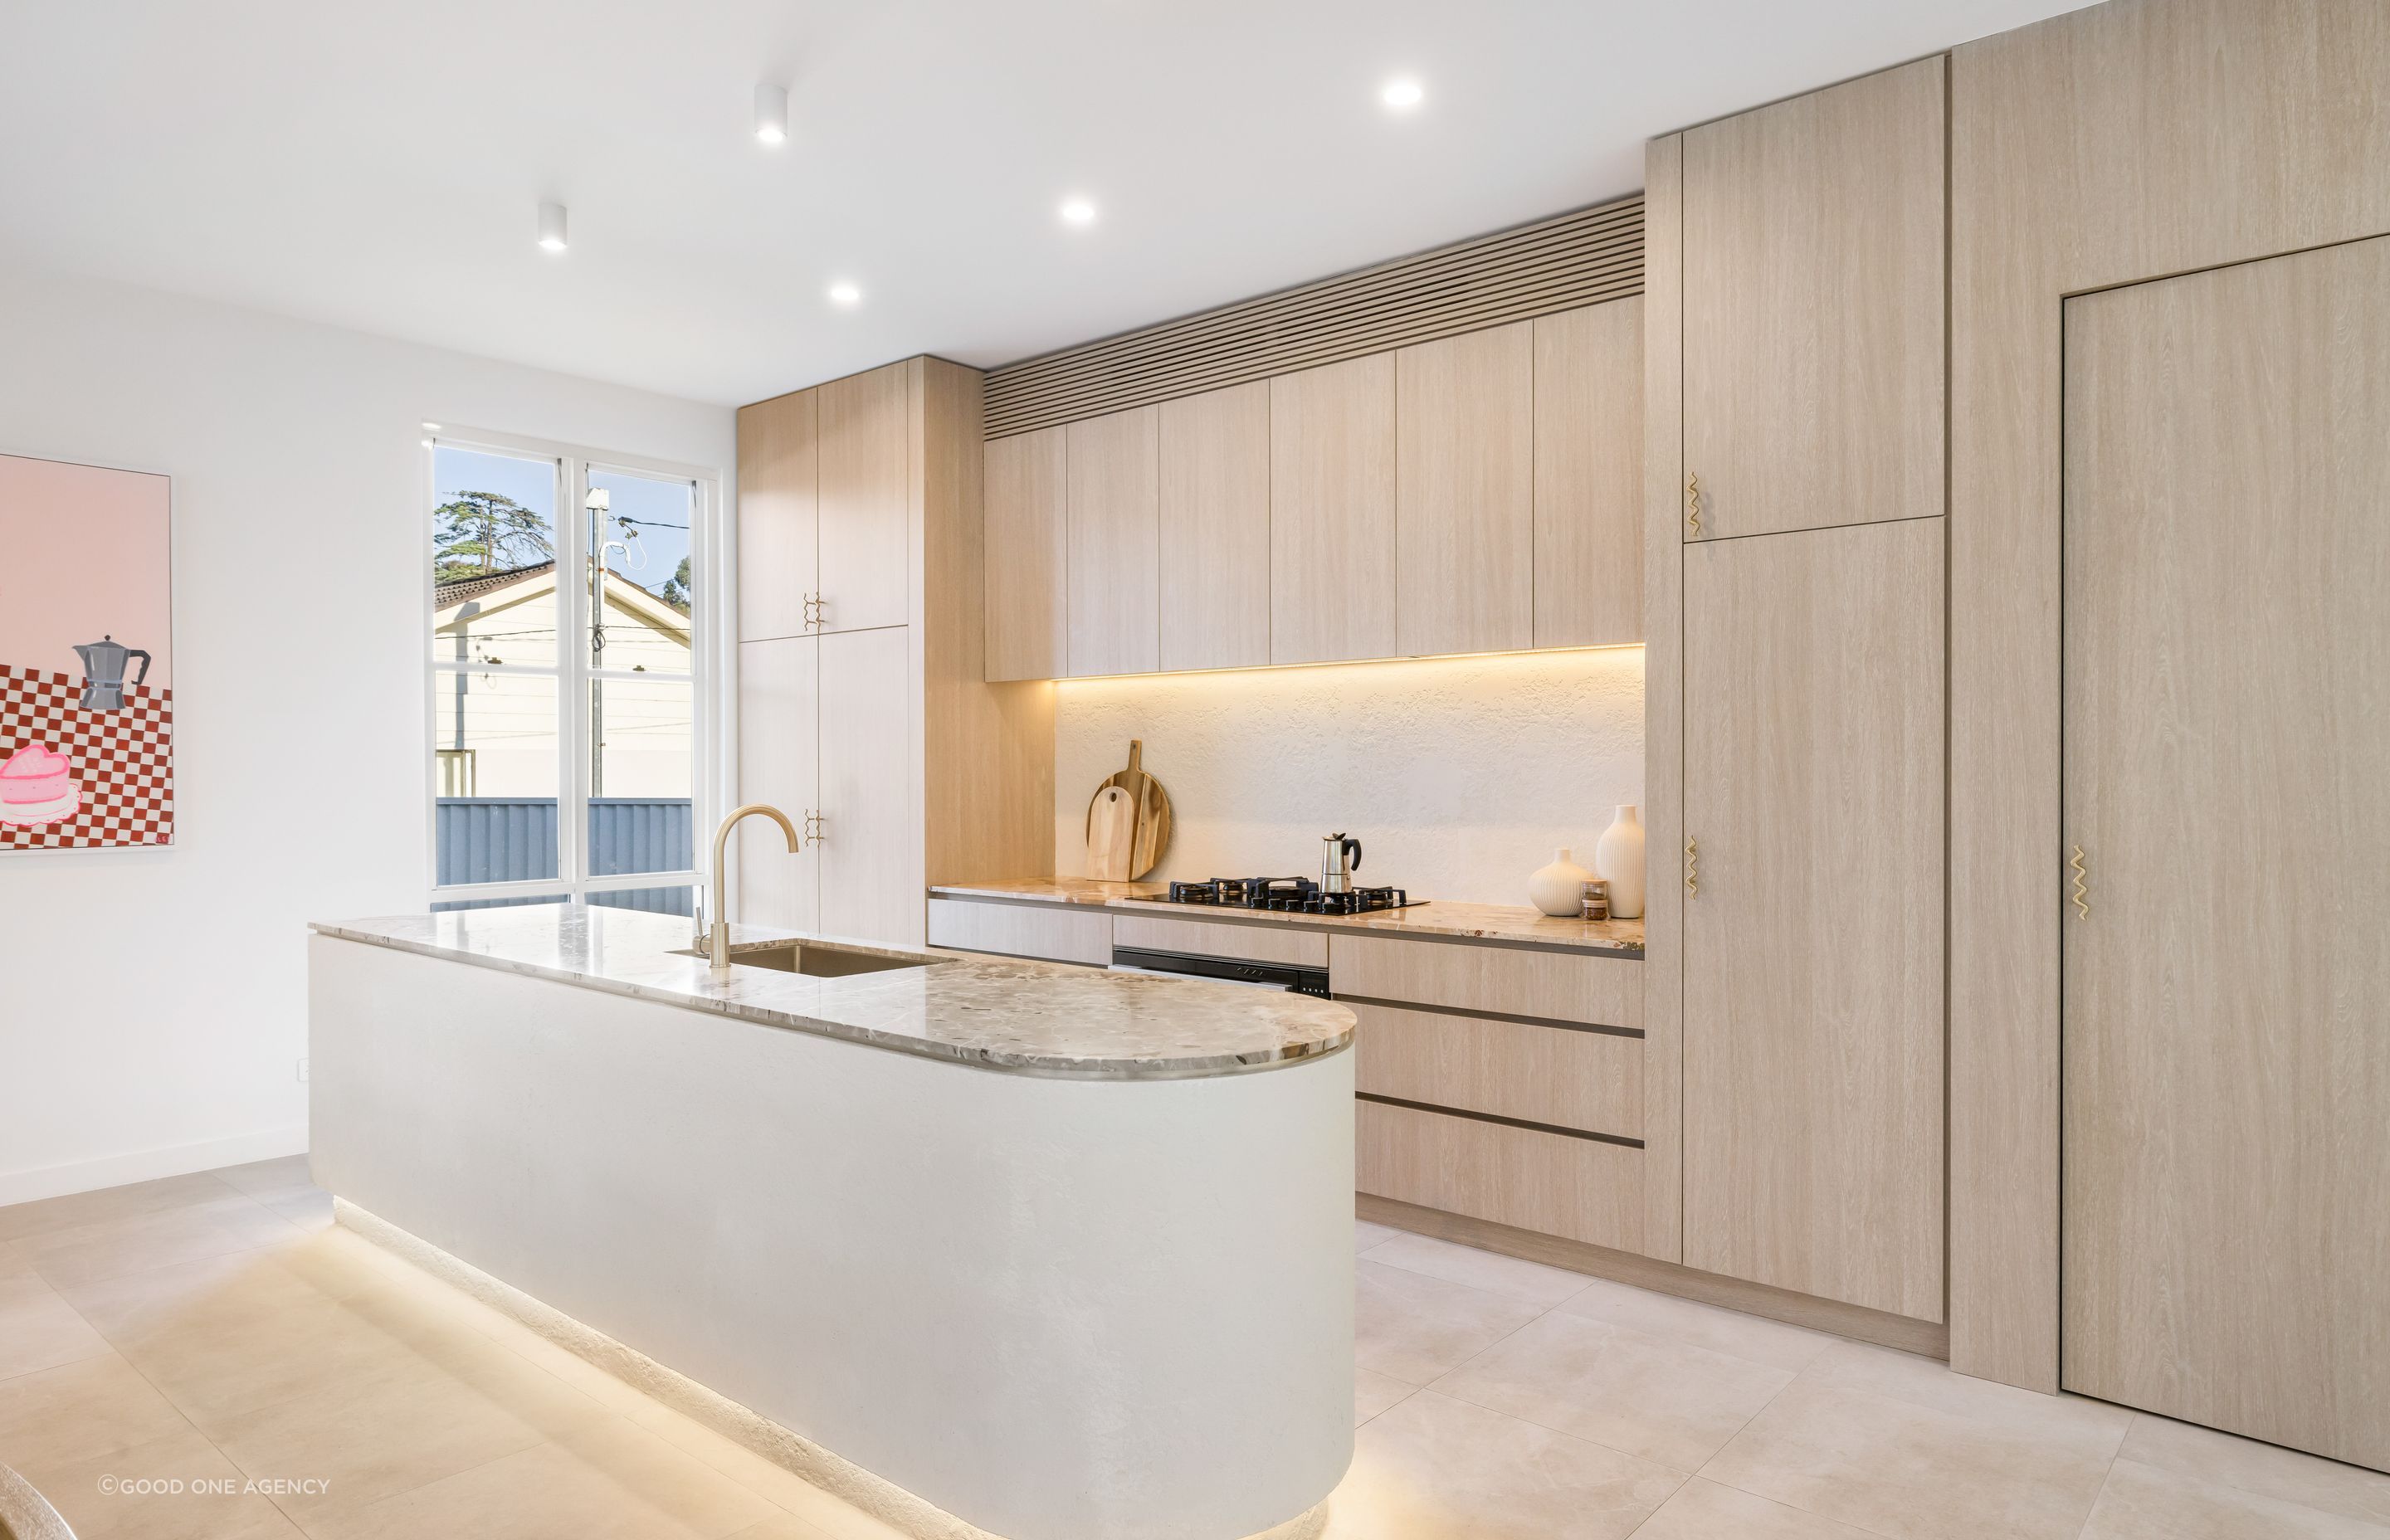 The kitchen features a pale palette and Botticelli marble benchtops.